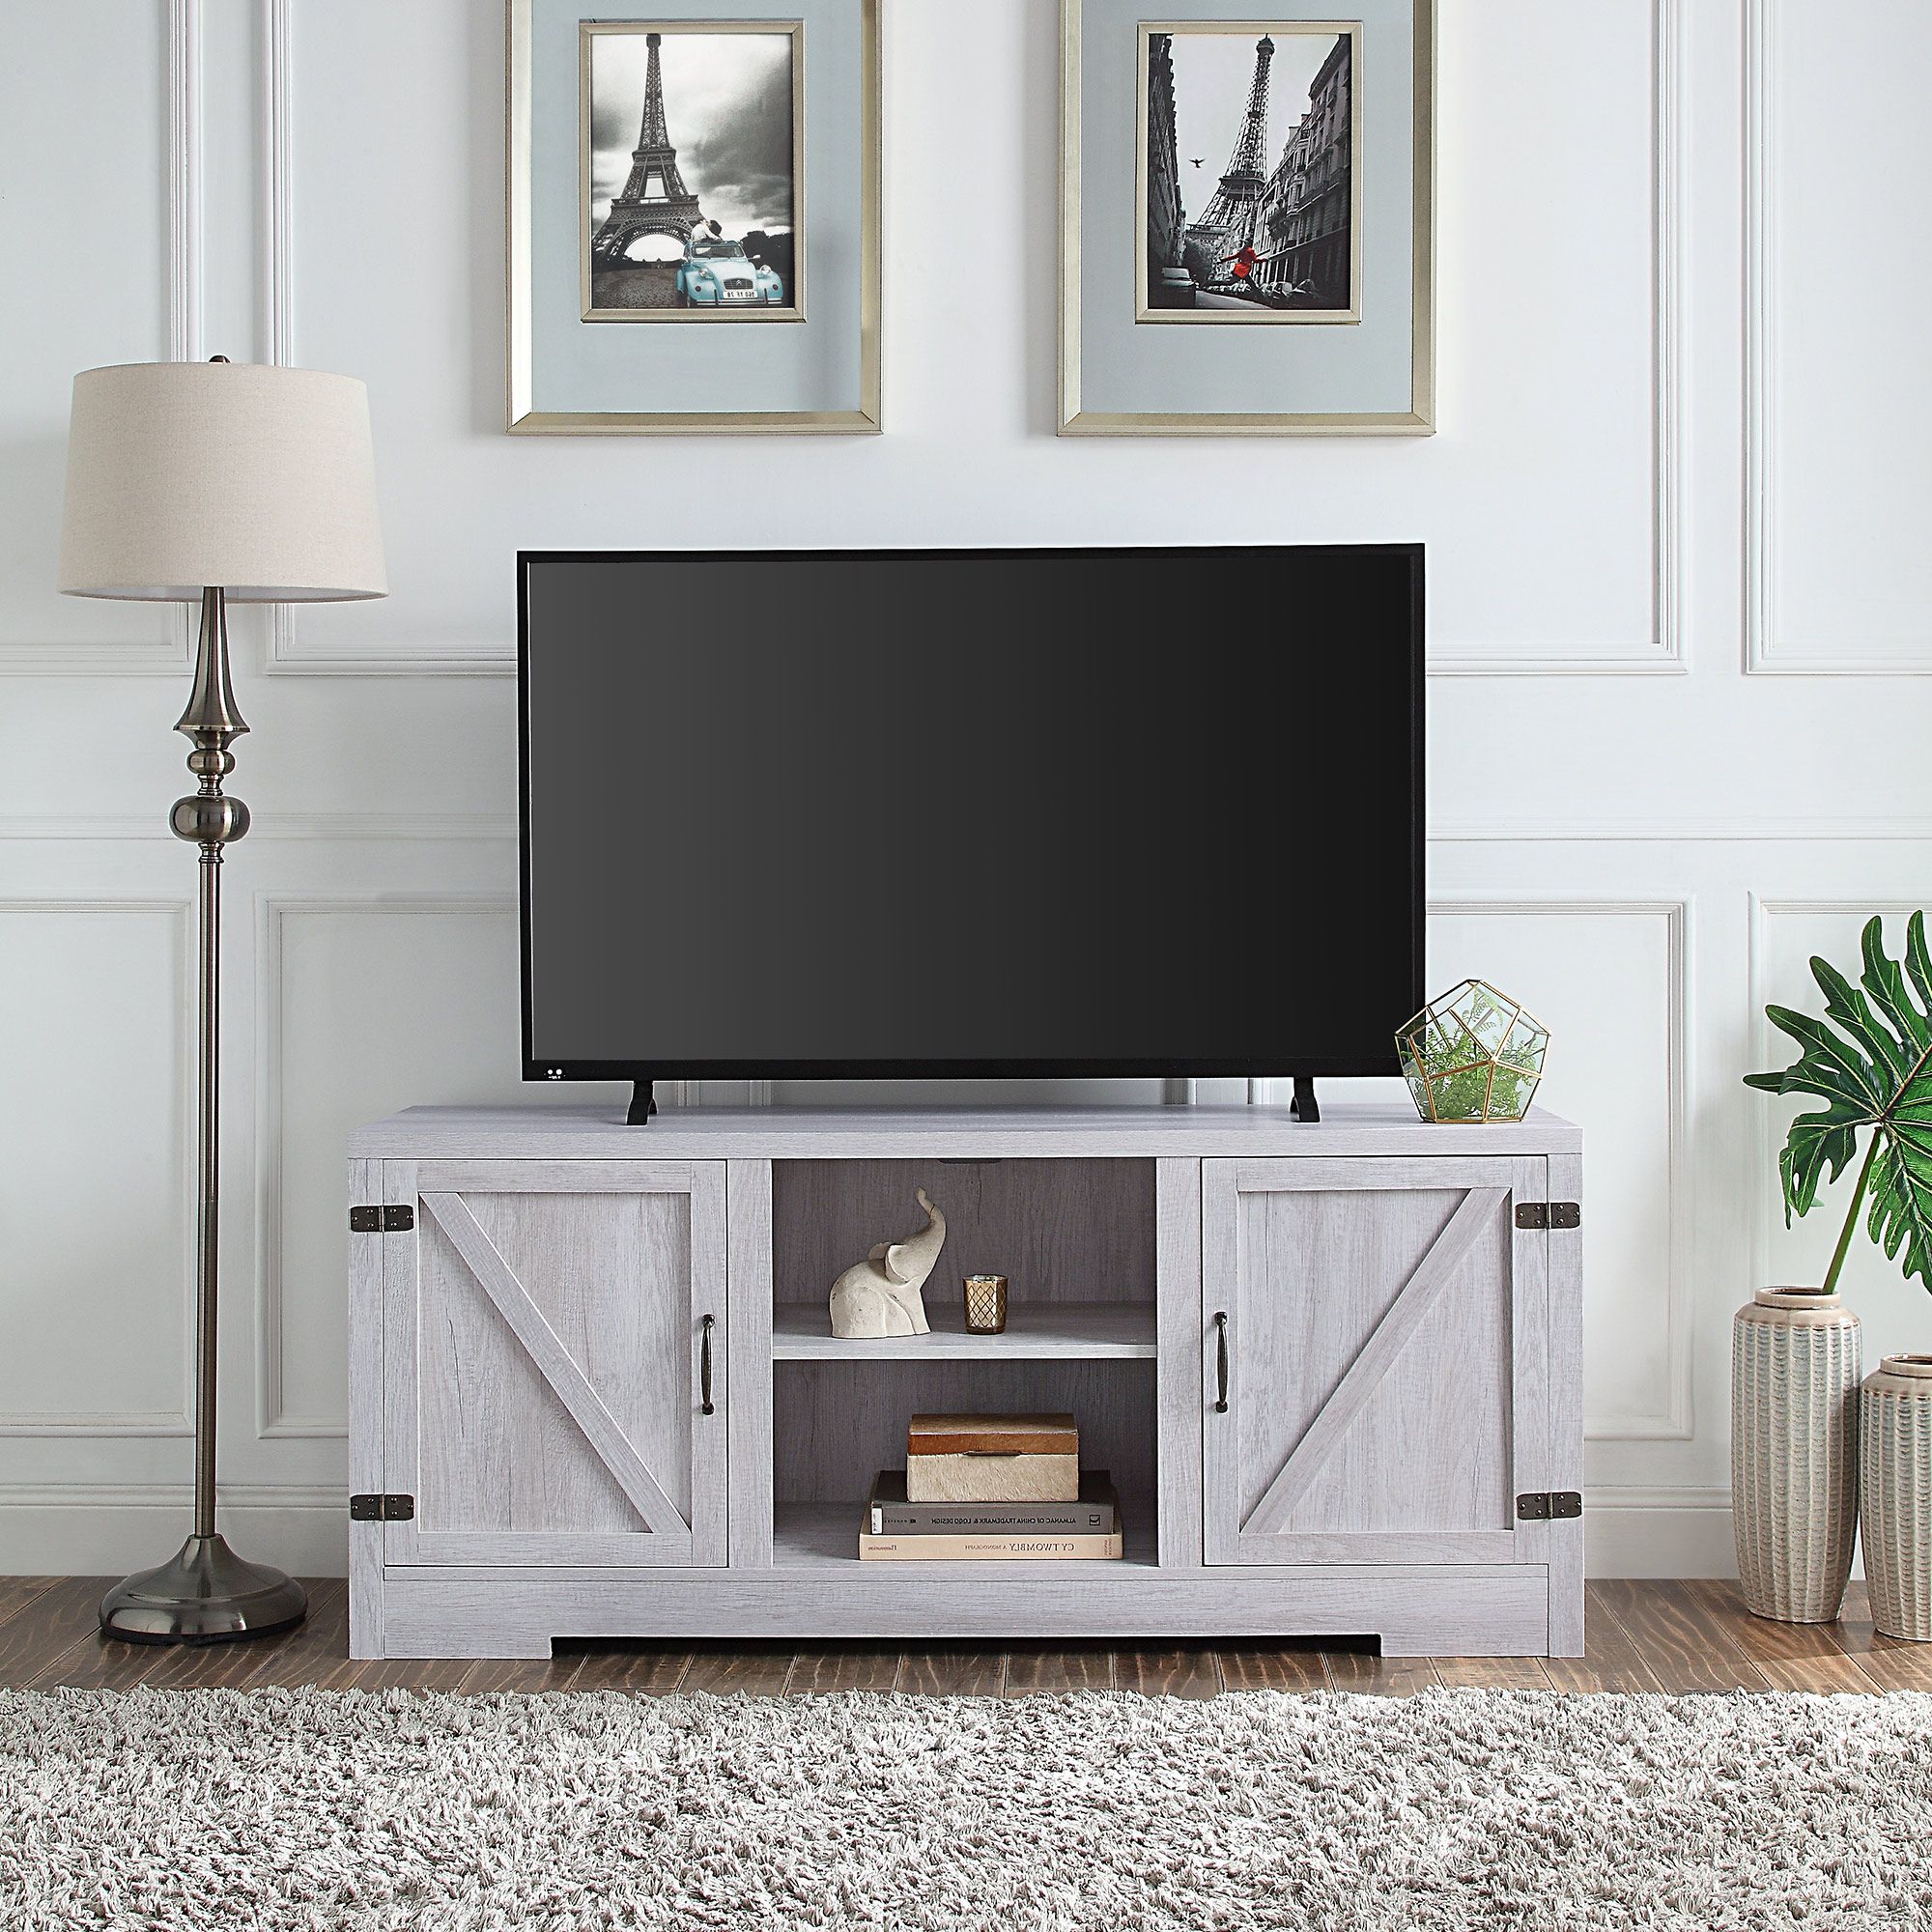 Belleze Hilo 58 Inch Barn Door Tv Stand Console For Tvs Up Within Karon Tv Stands For Tvs Up To 65" (View 8 of 20)